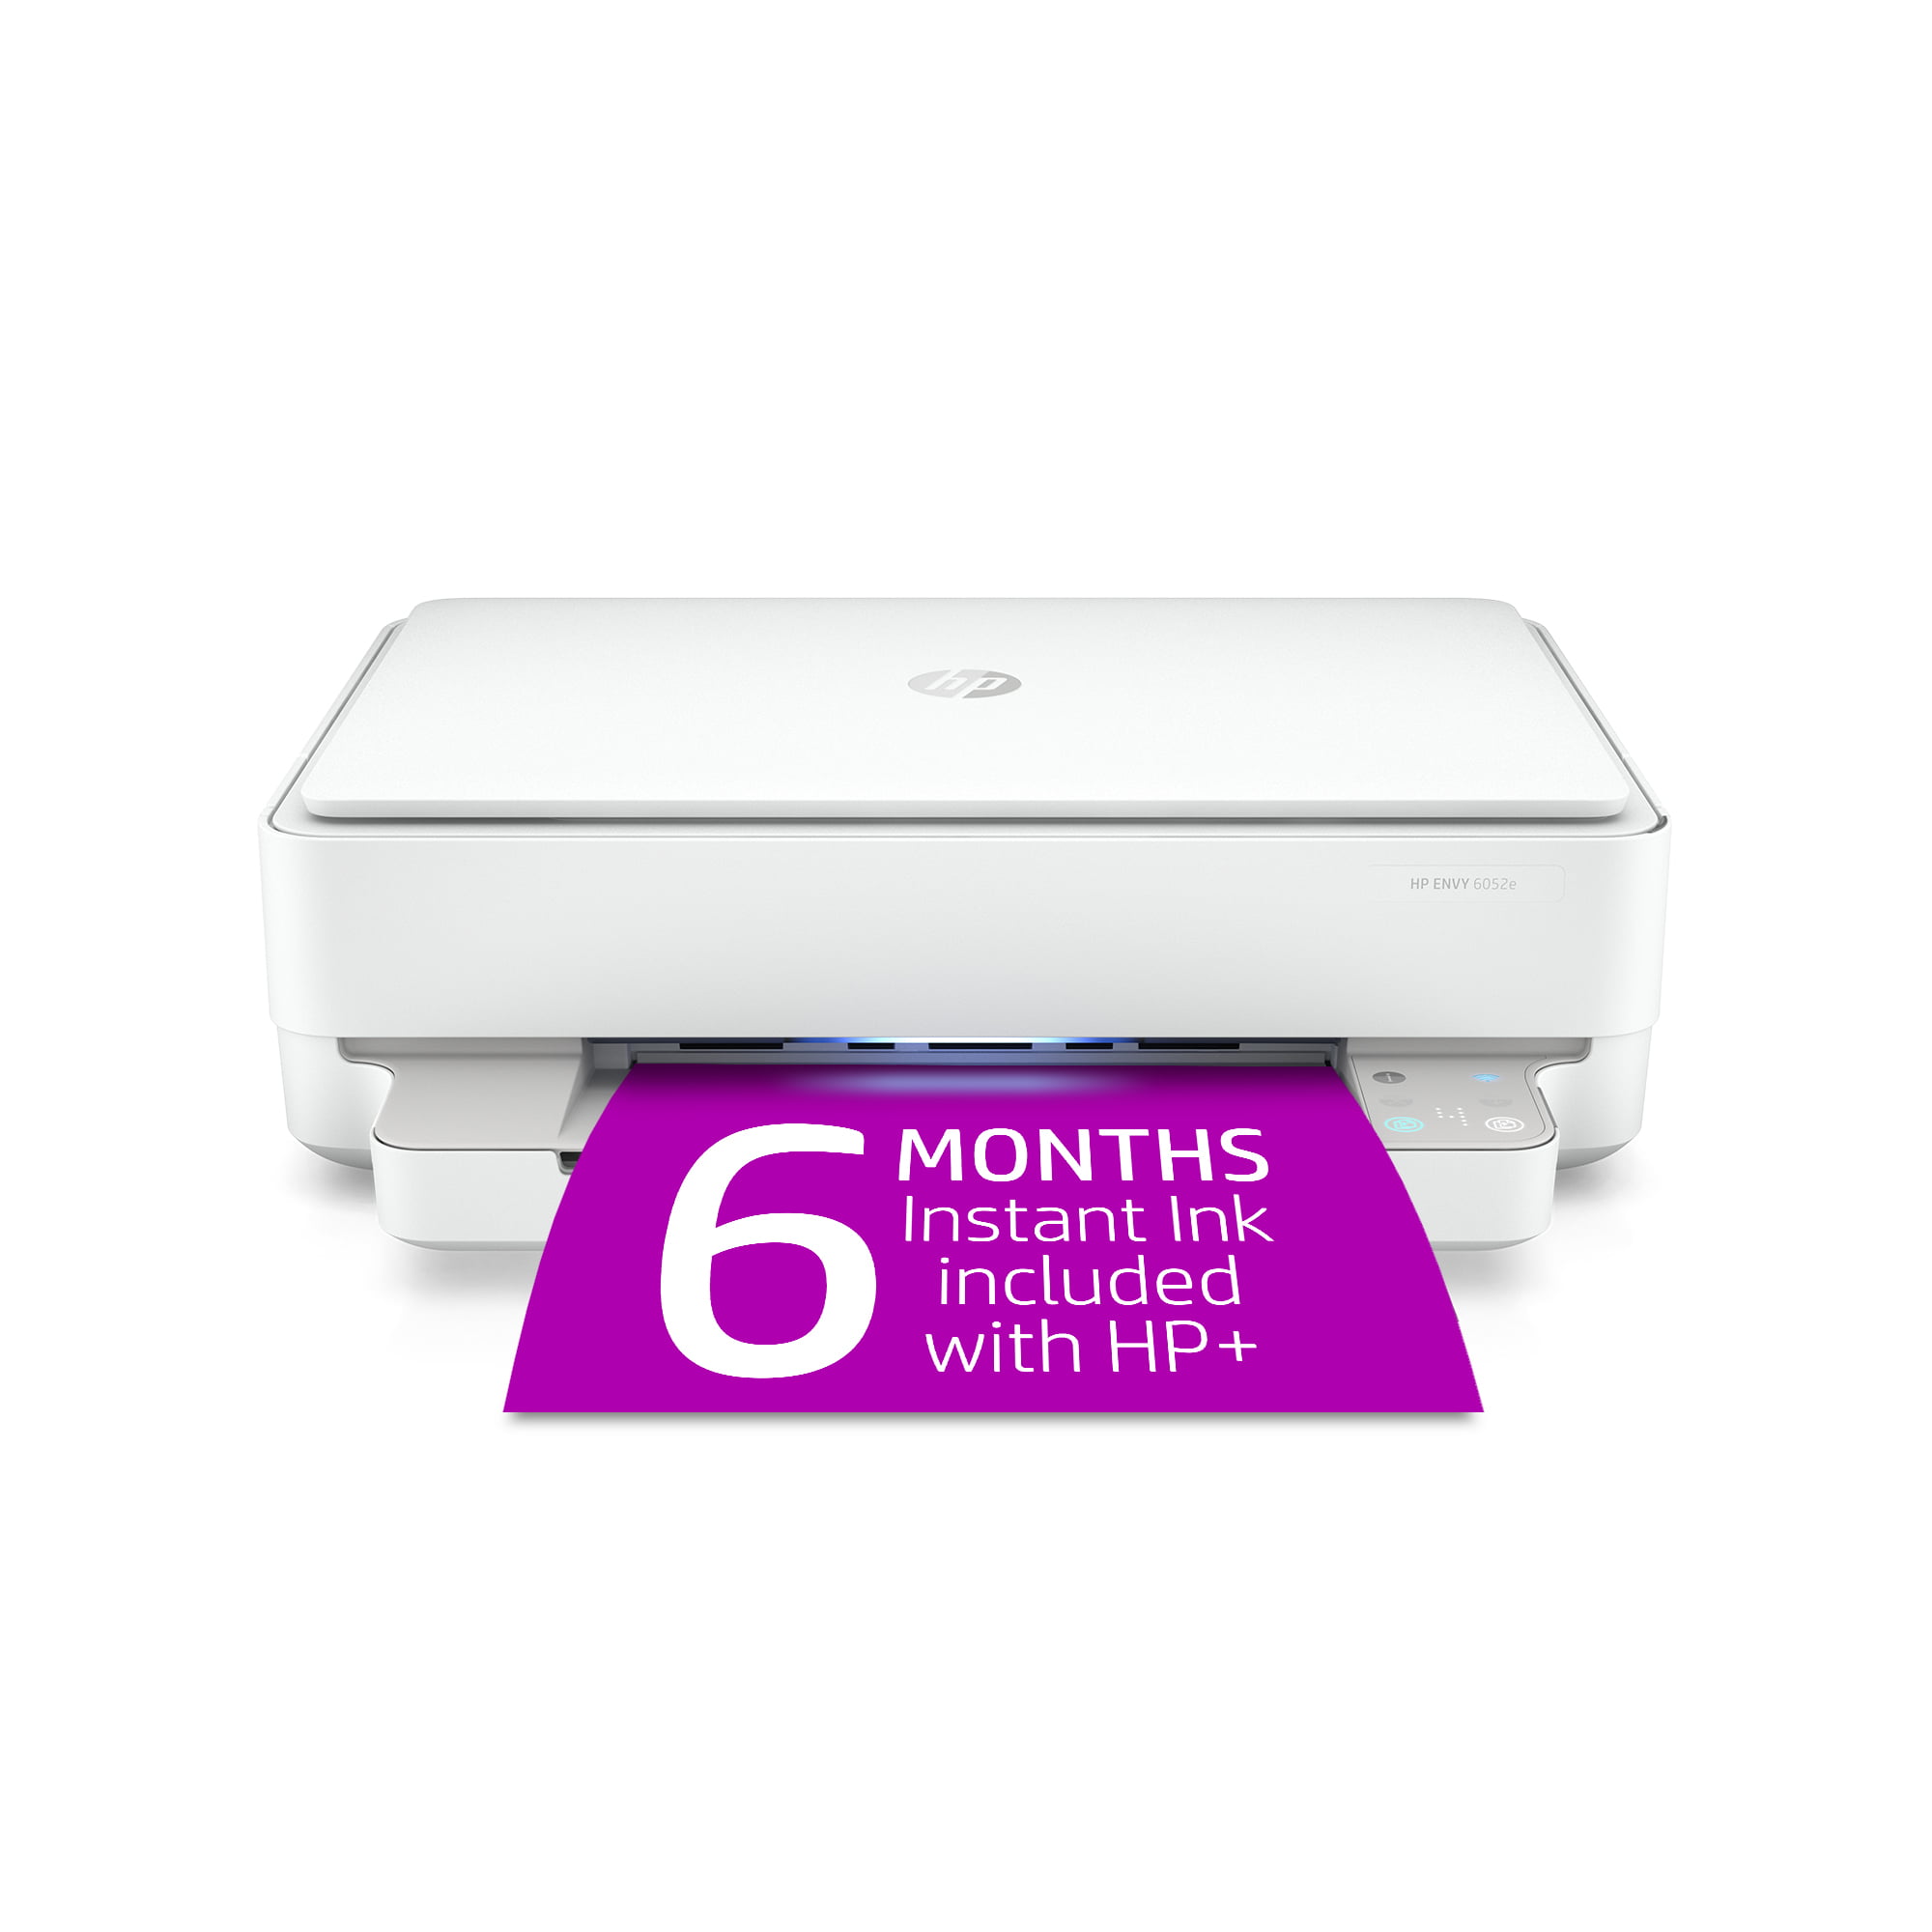 HP ENVY 6452e All-in-One Color Inkjet with 6 Months Ink Included HP+ - Walmart.com